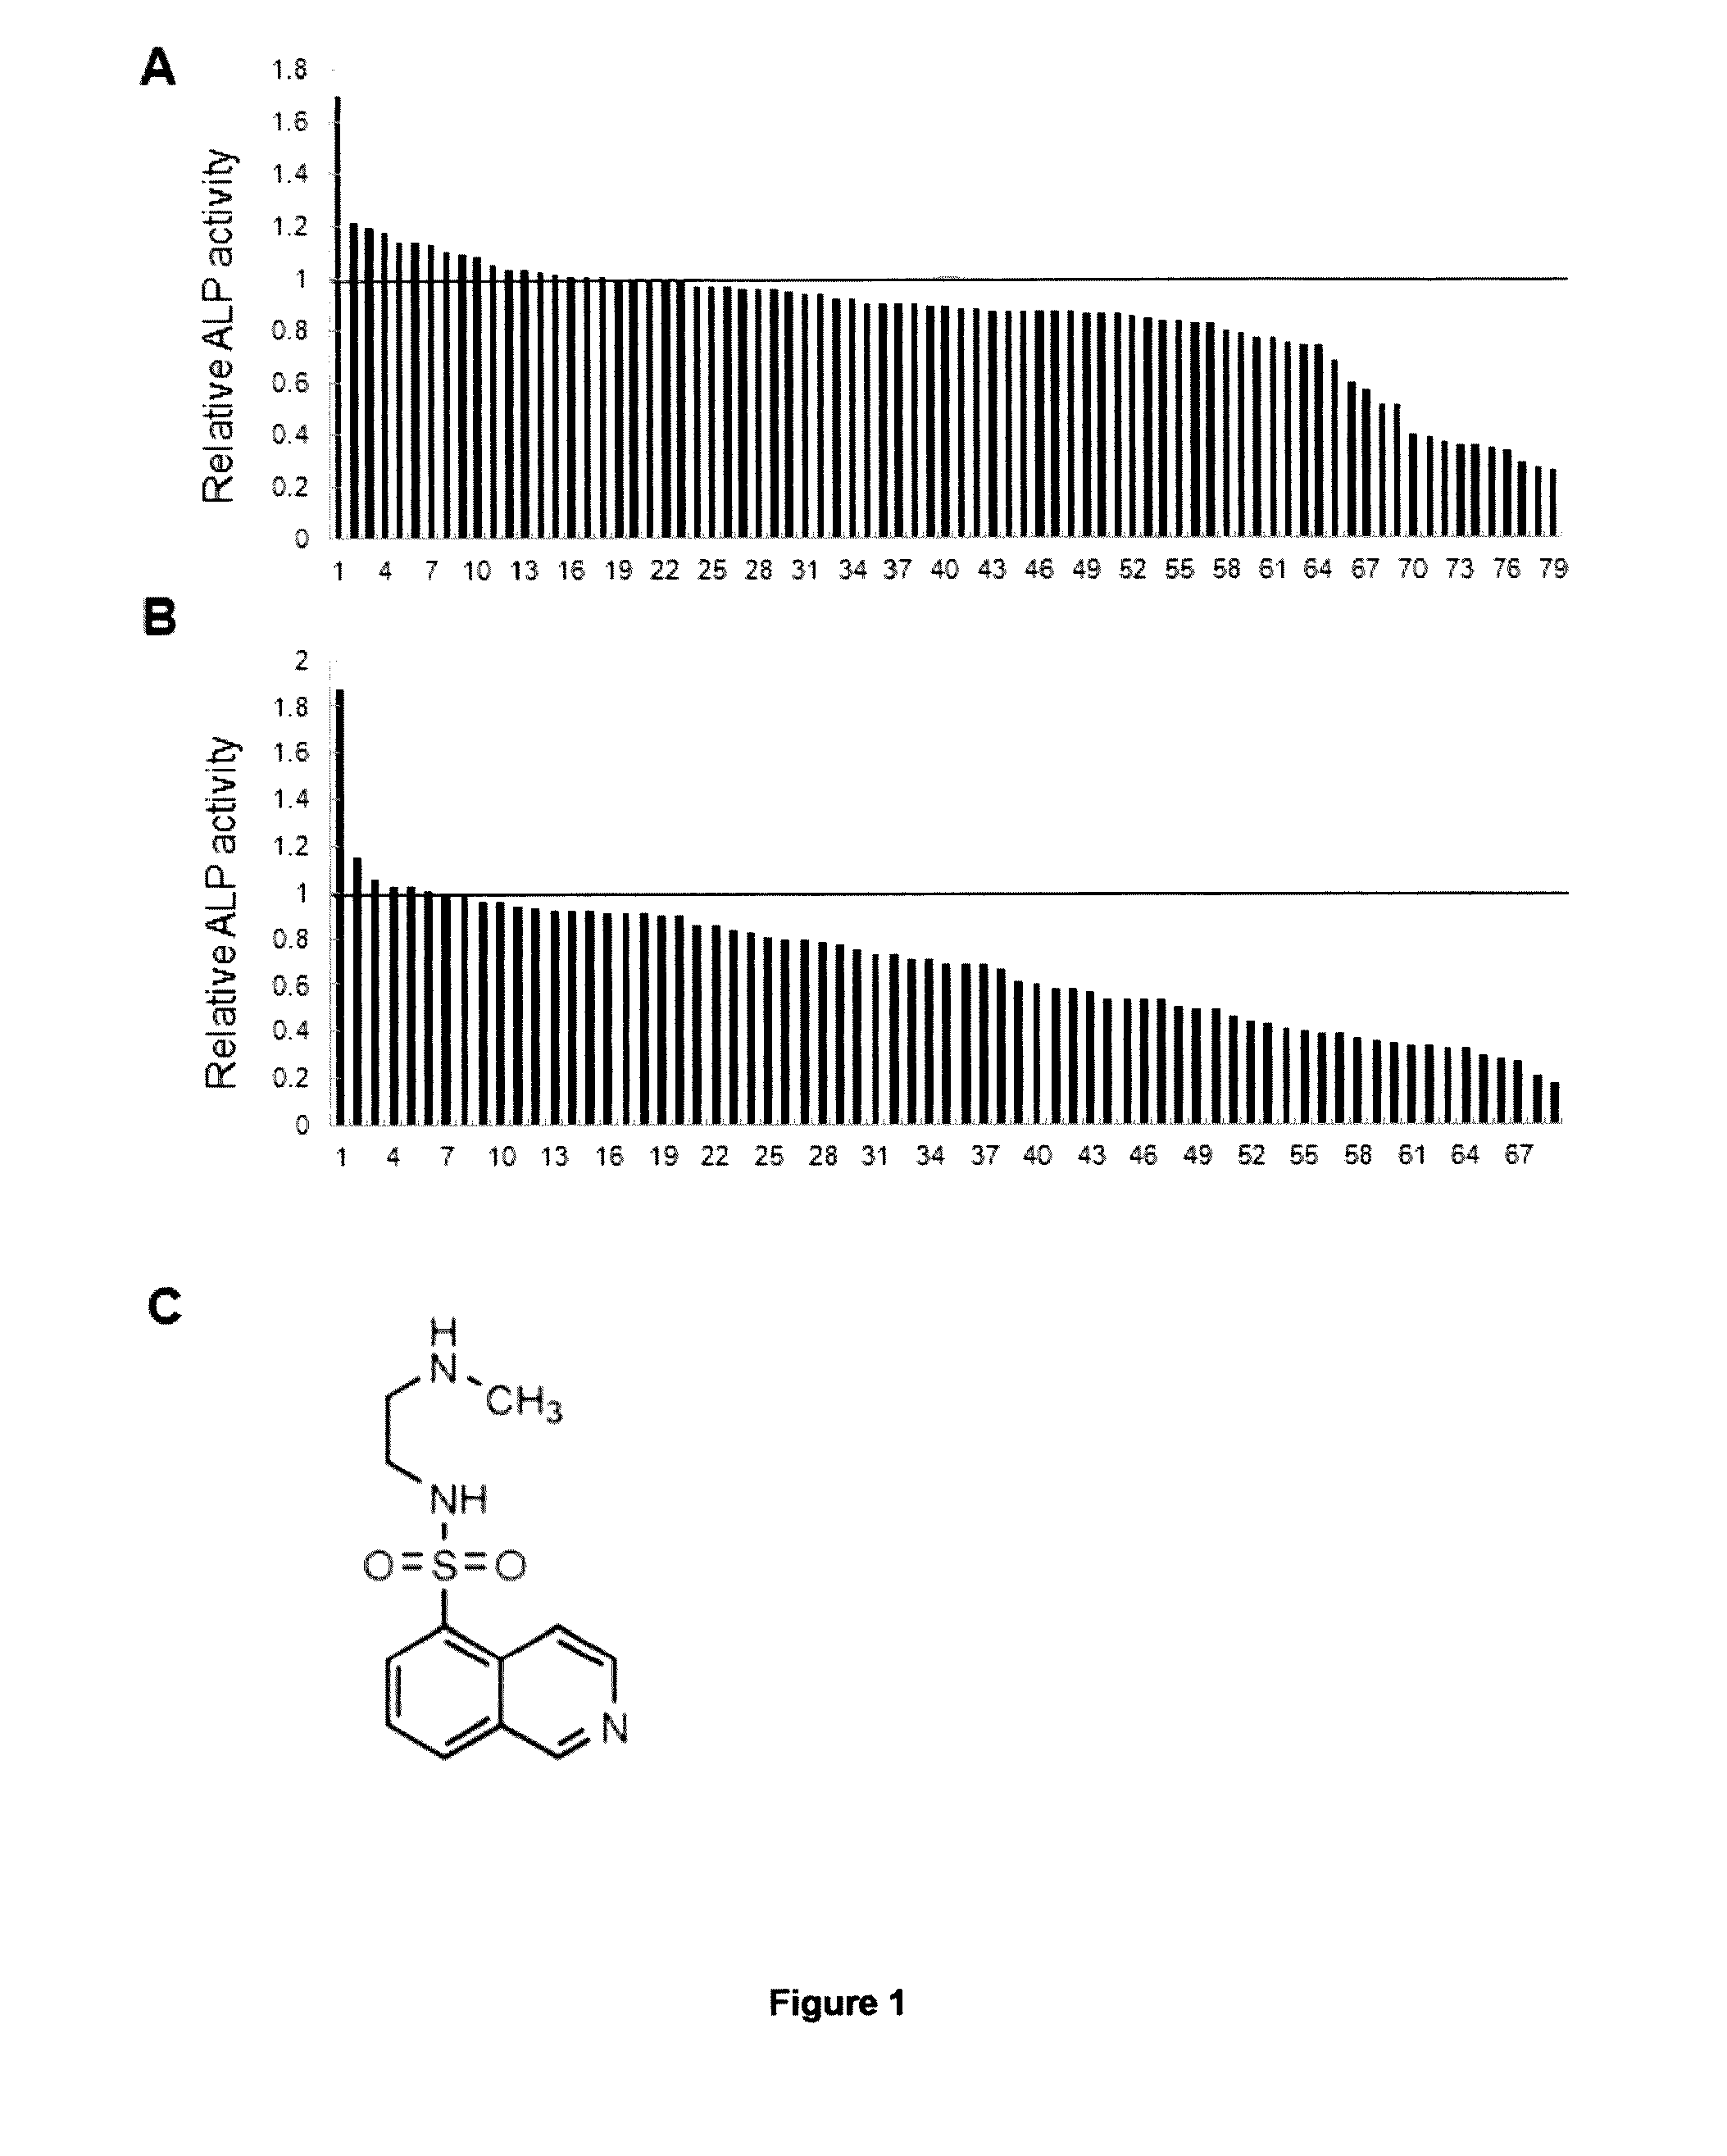 Anabolic compounds for treating and preventing bone loss diseases